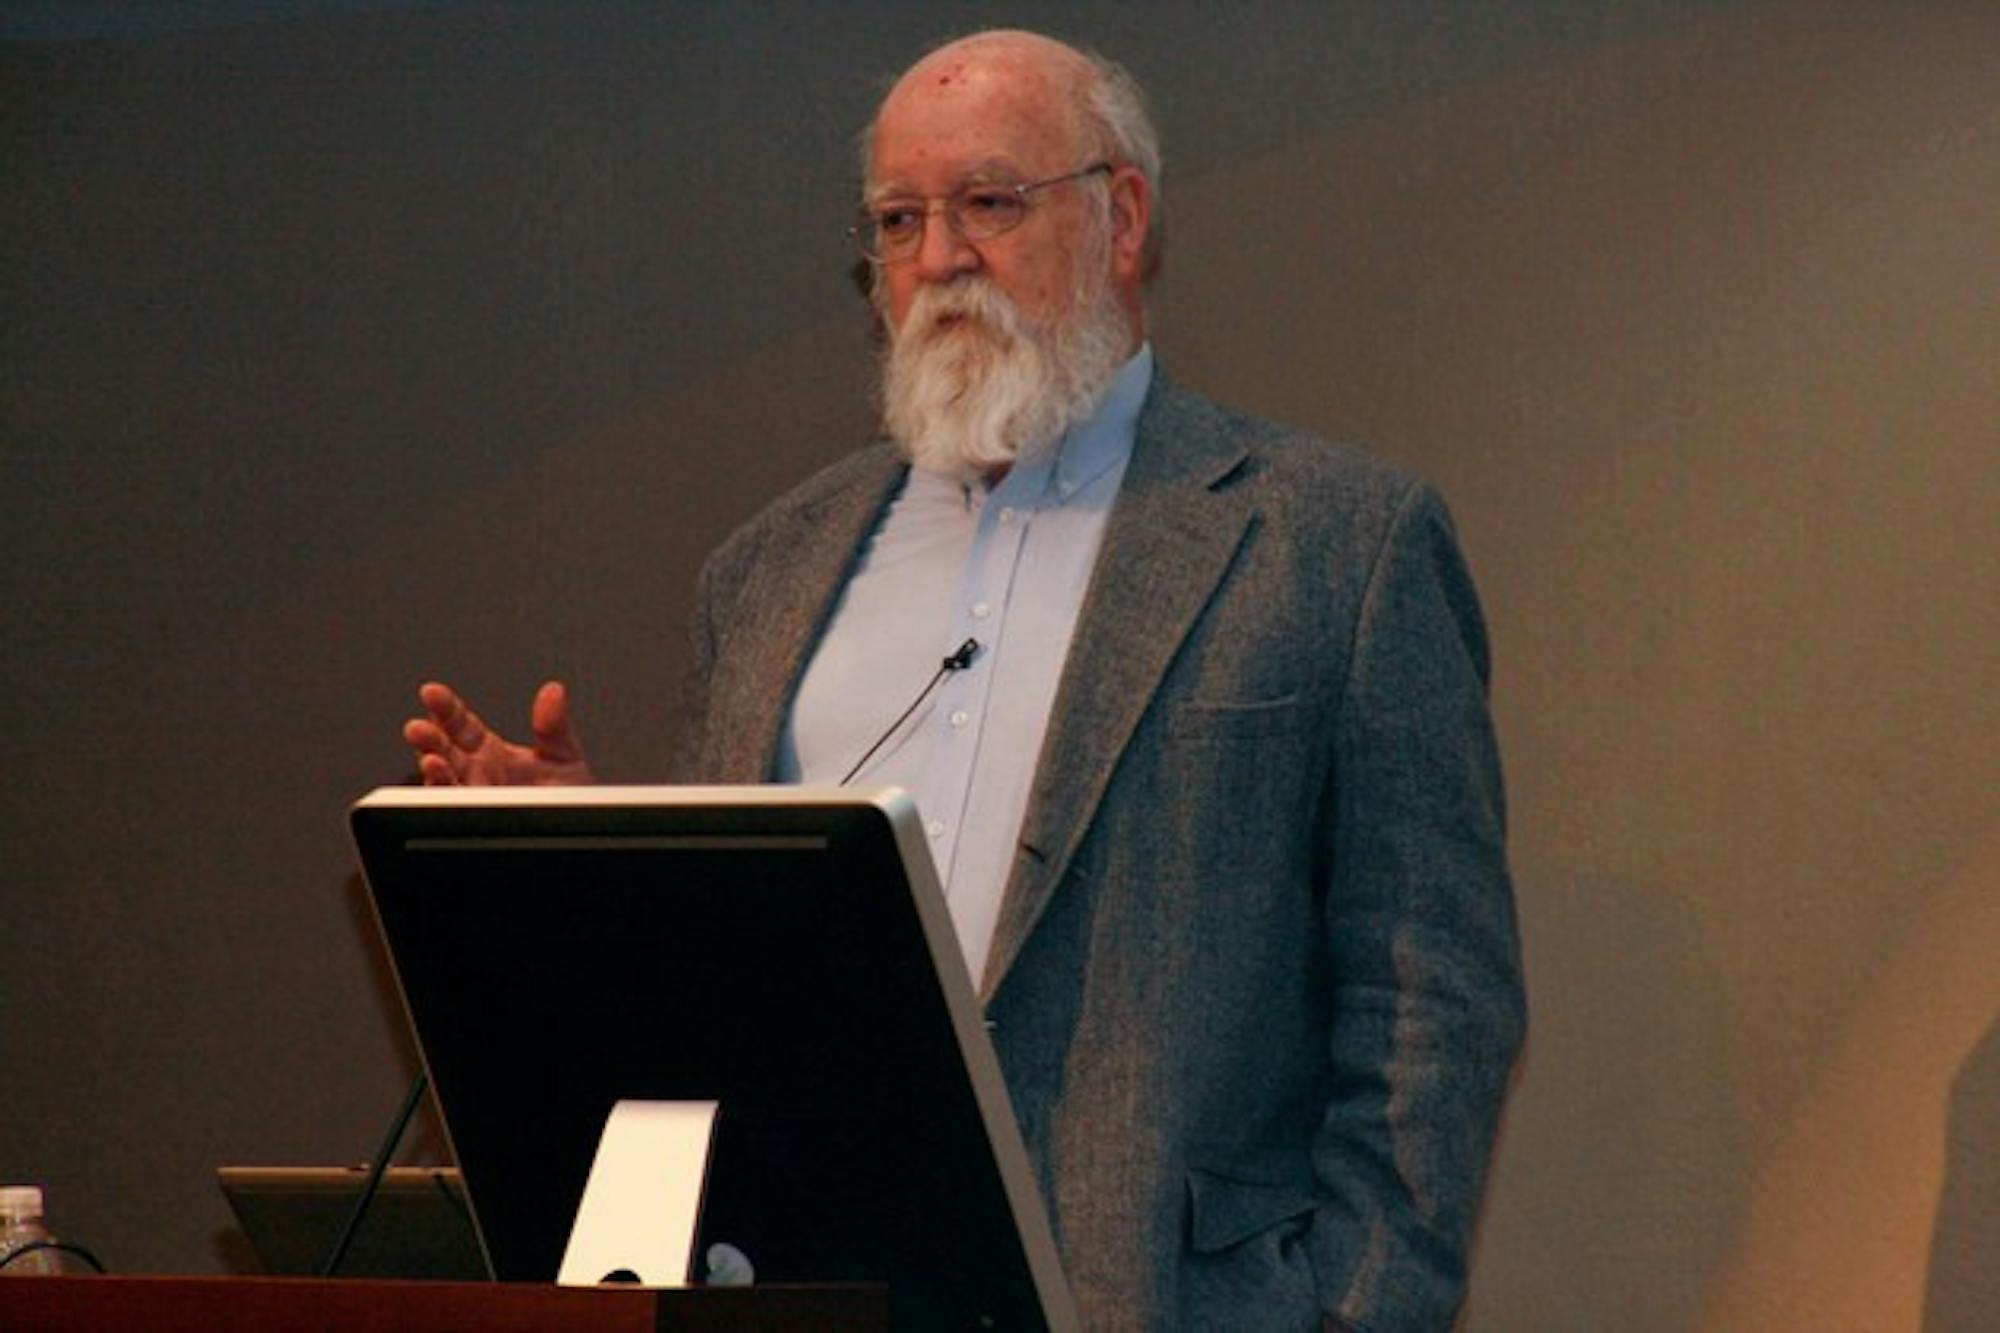 Tufts professor Daniel Dennett advocated studying religion as a 